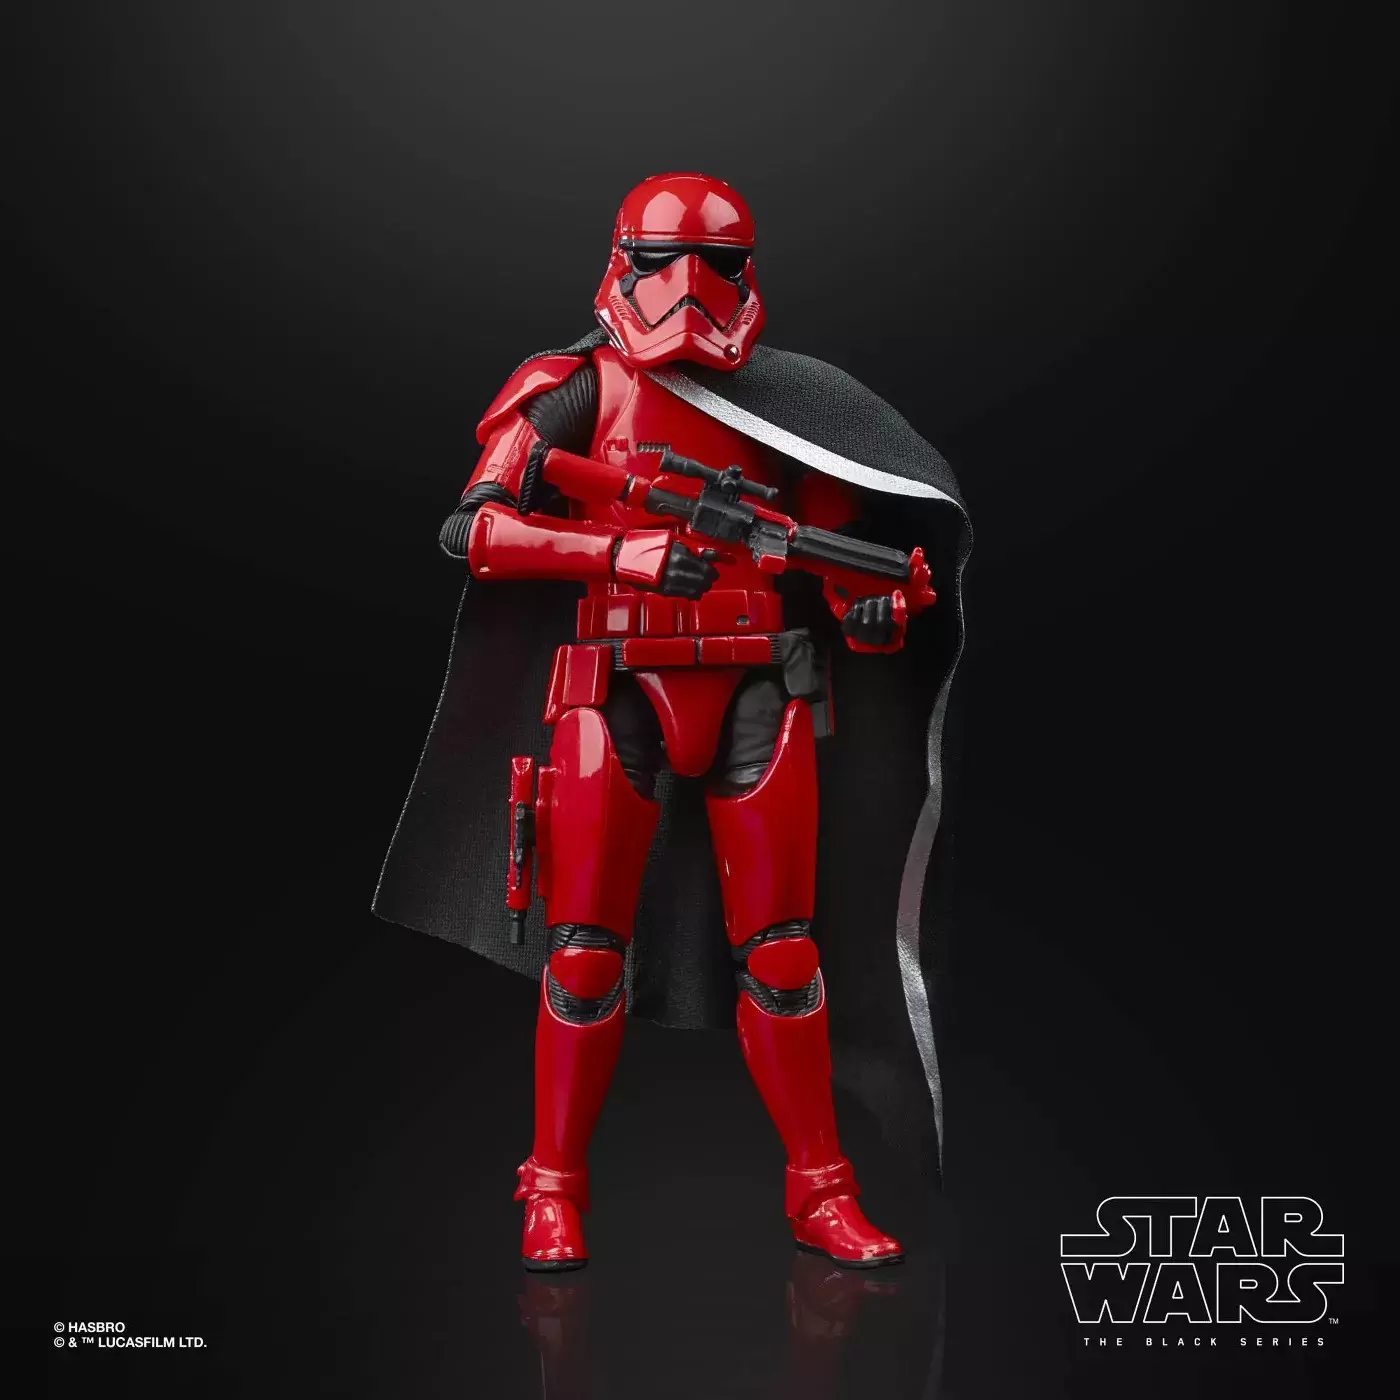 STAR WARS BLACK SERIES CAPTAIN CARDINAL GALAXYS EDGE TRADING OUTPOST IN HAND